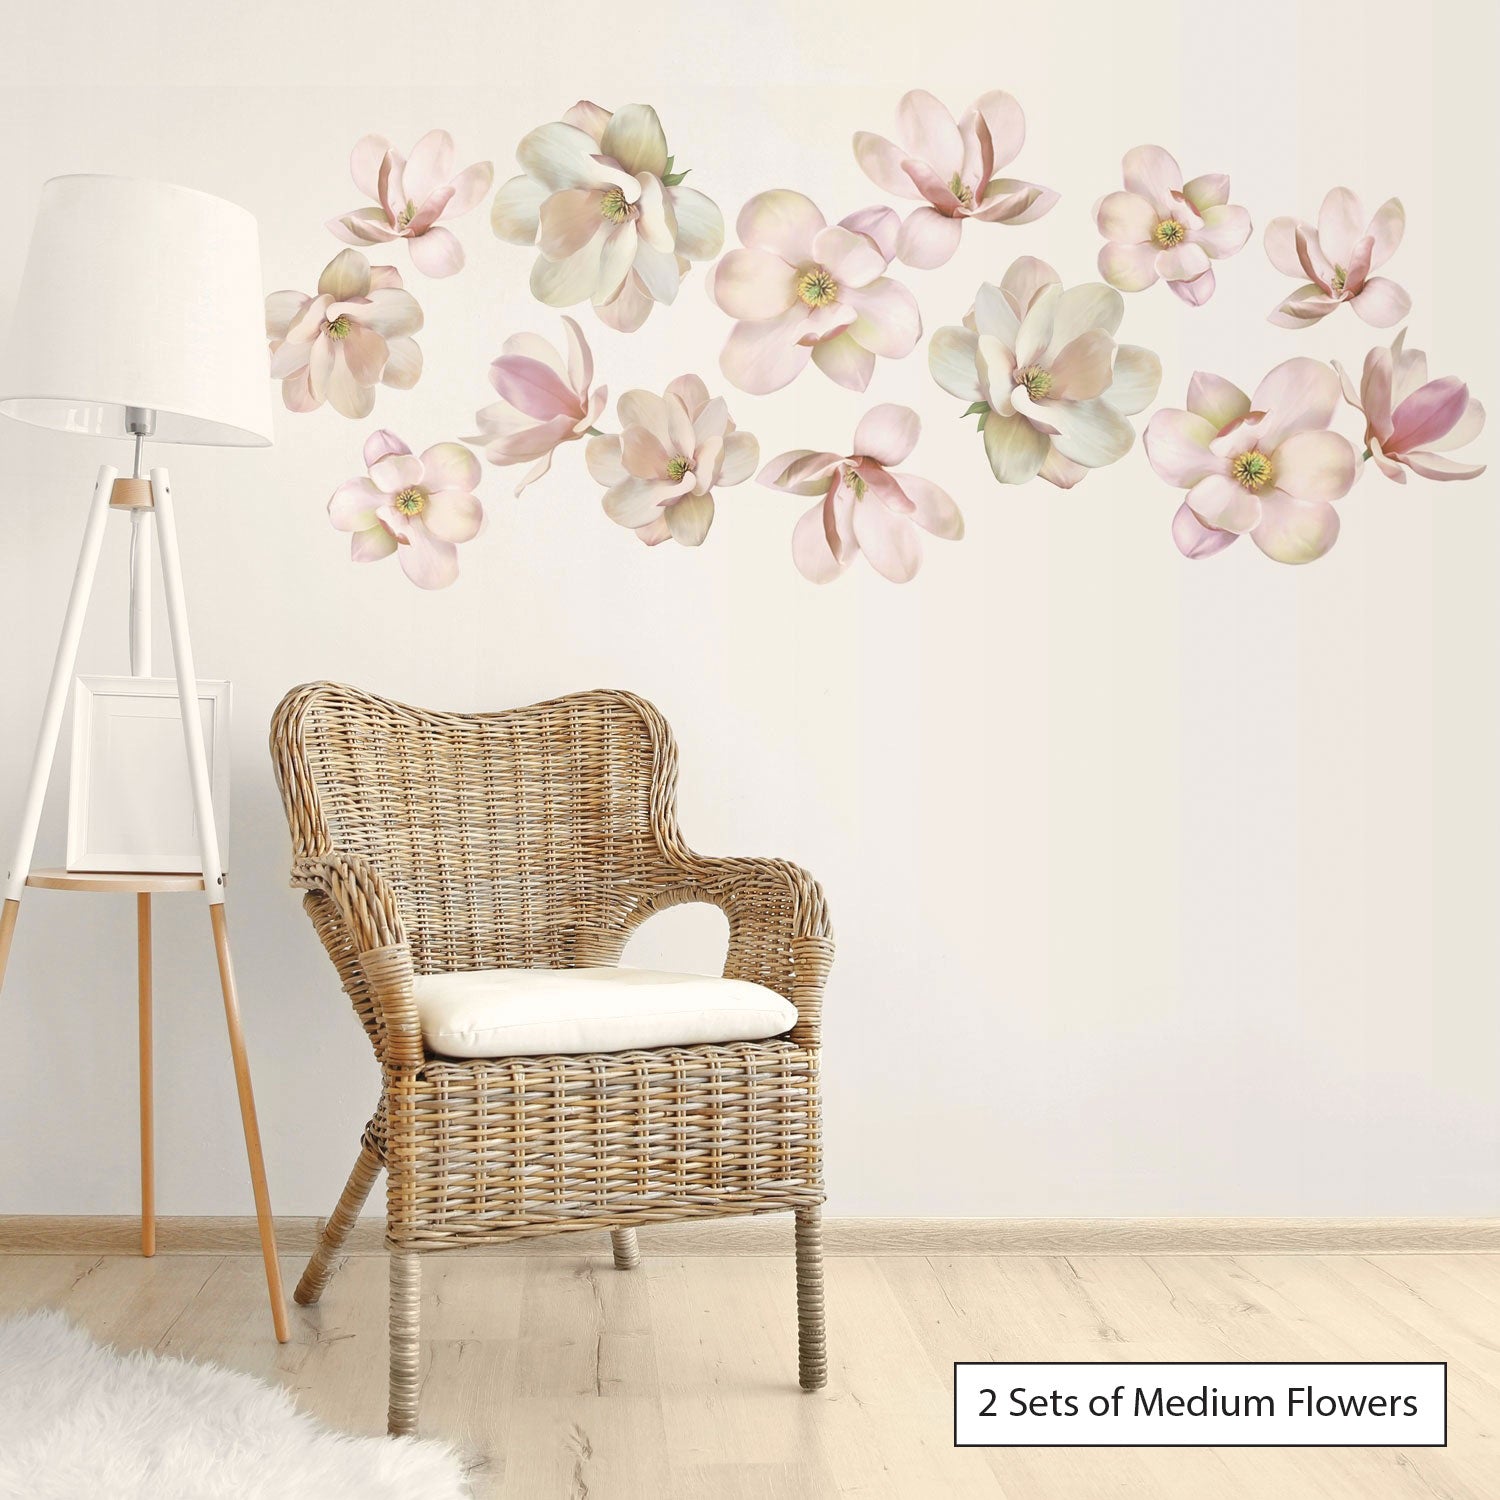 Pink Watercolor Flower Wall Decals, Girls Wall Decals, Repositionable  Floral Wall Stickers